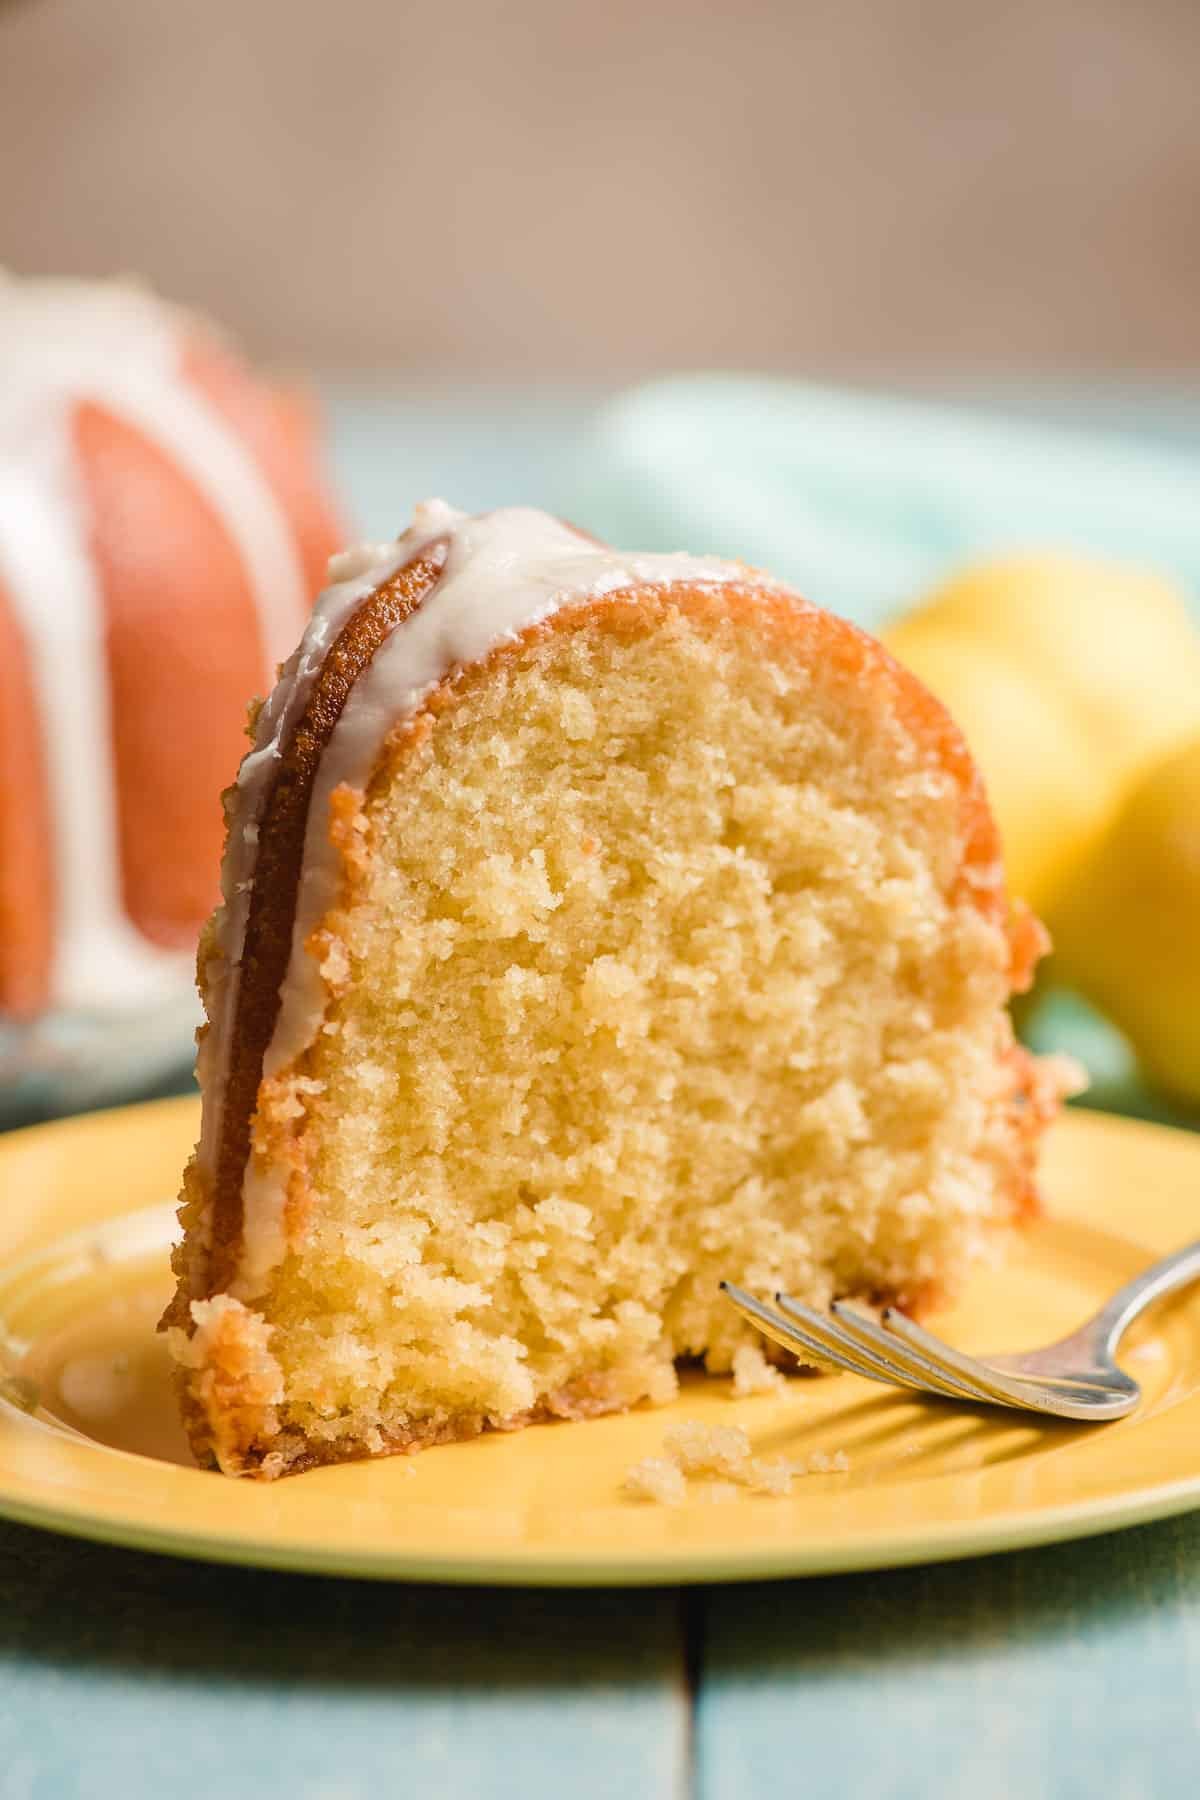 Iced lemon bundt confection standing on a yellow plate.